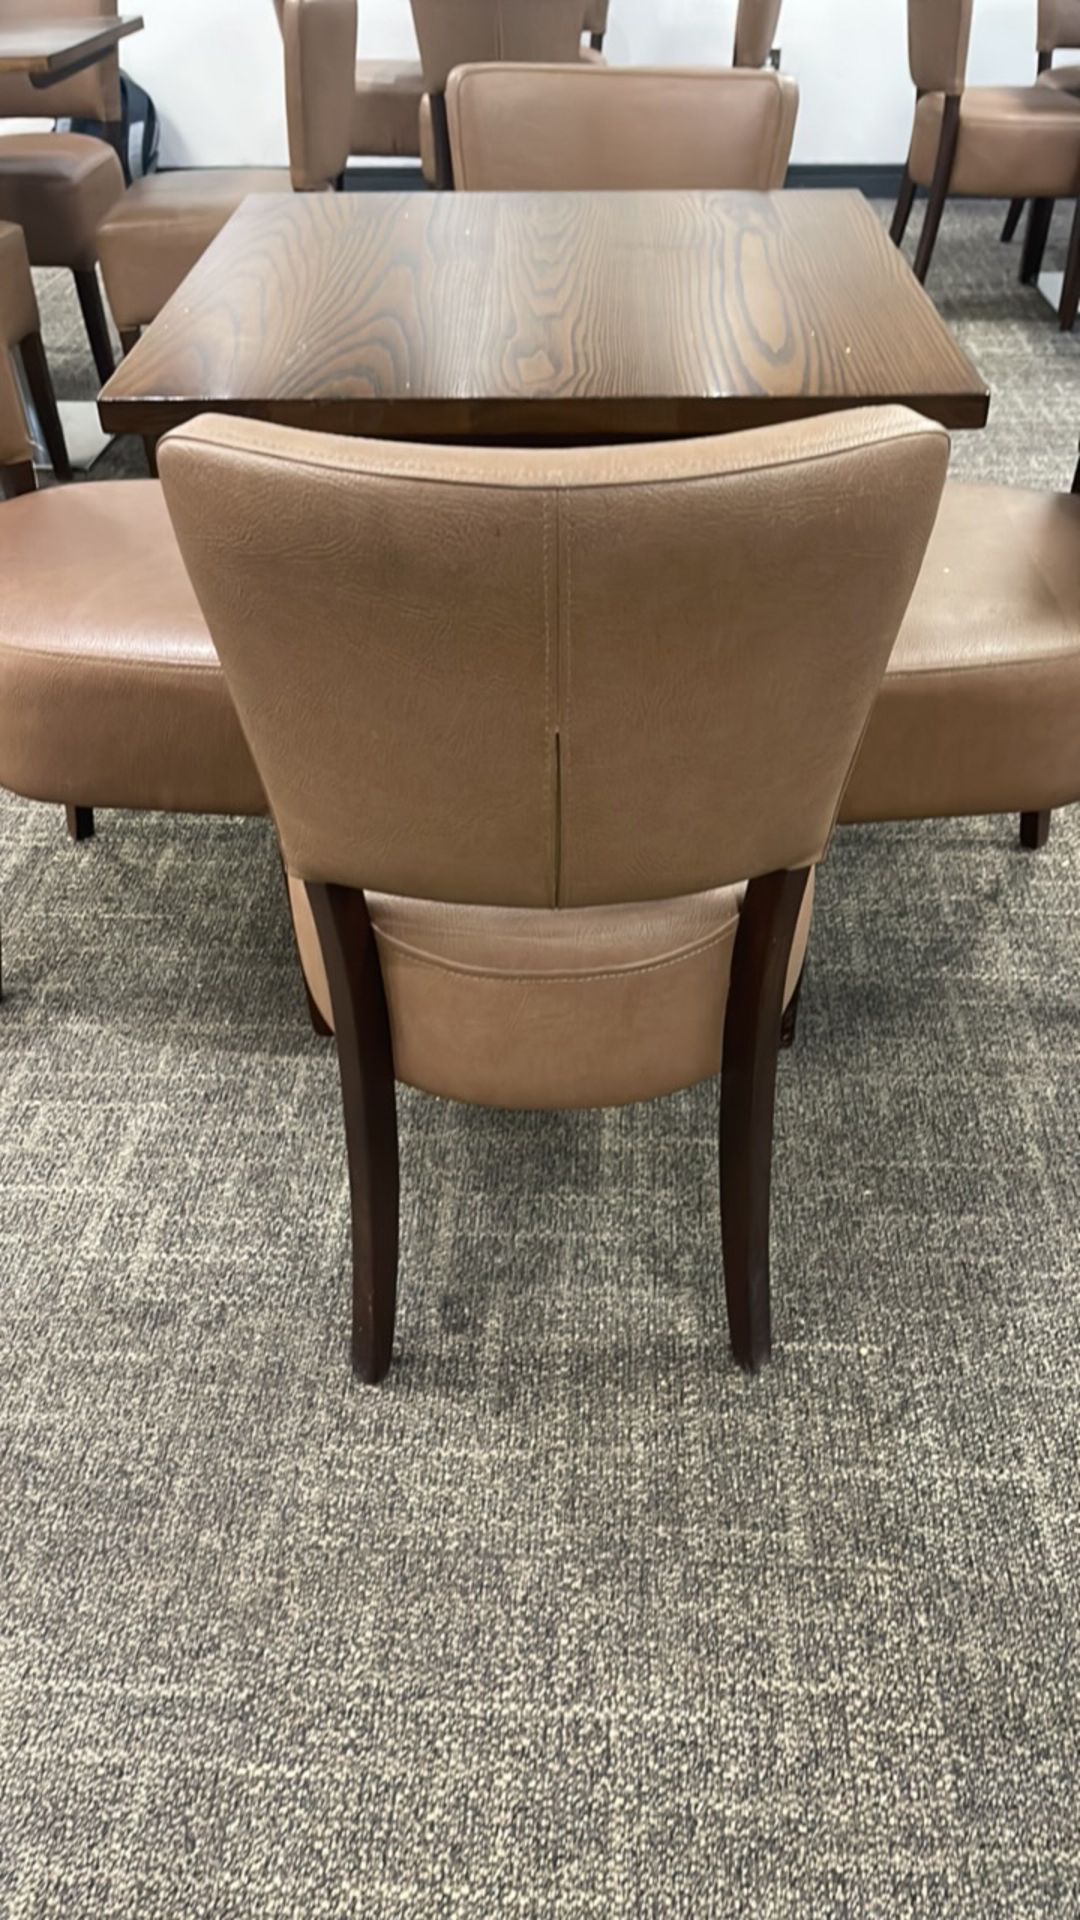 4 x Brown Leather Chairs and 1 x Square Table - Image 4 of 6